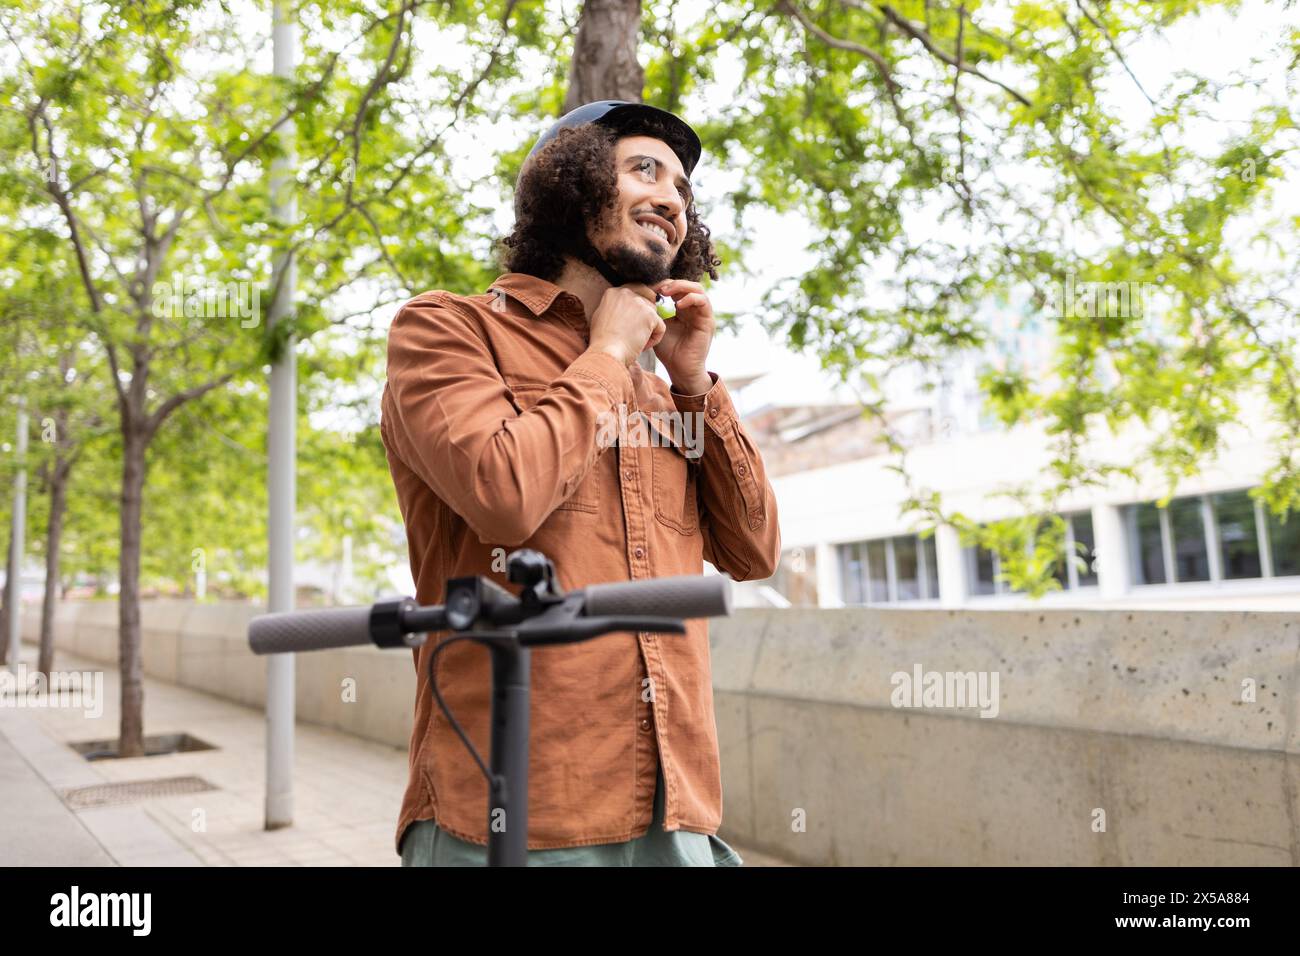 A cheerful man adjusts his helmet in preparation to ride his electric scooter, standing in an urban park lined with lush trees Stock Photo